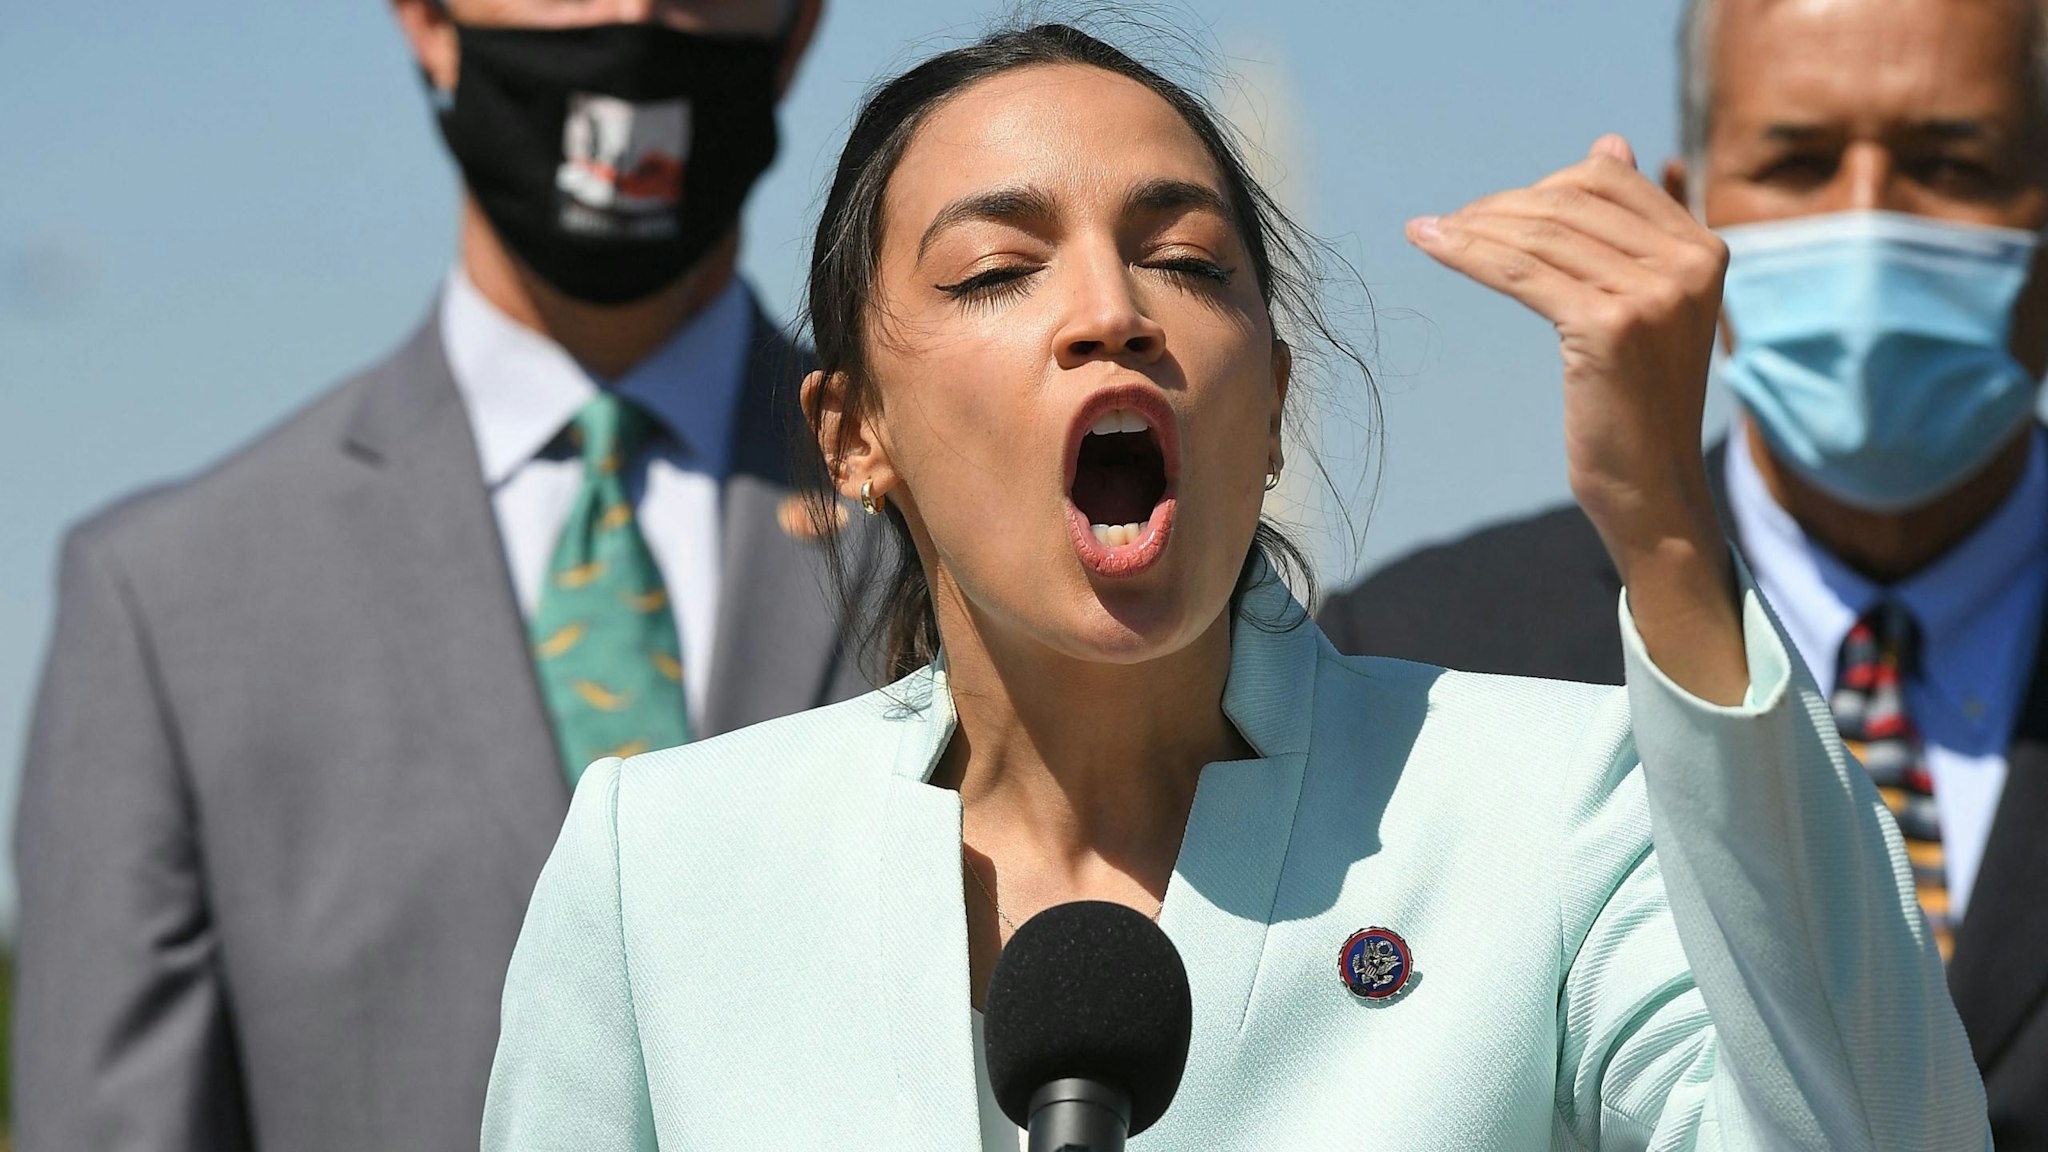 Representative Alexandria Ocasio-Cortez(D-NY) next to Senator Ed Markey(R), D-MA, speaks during a press conference to re-introduce the Green New Deal in front of the US Capitol in Washington, DC on April 20, 2021.